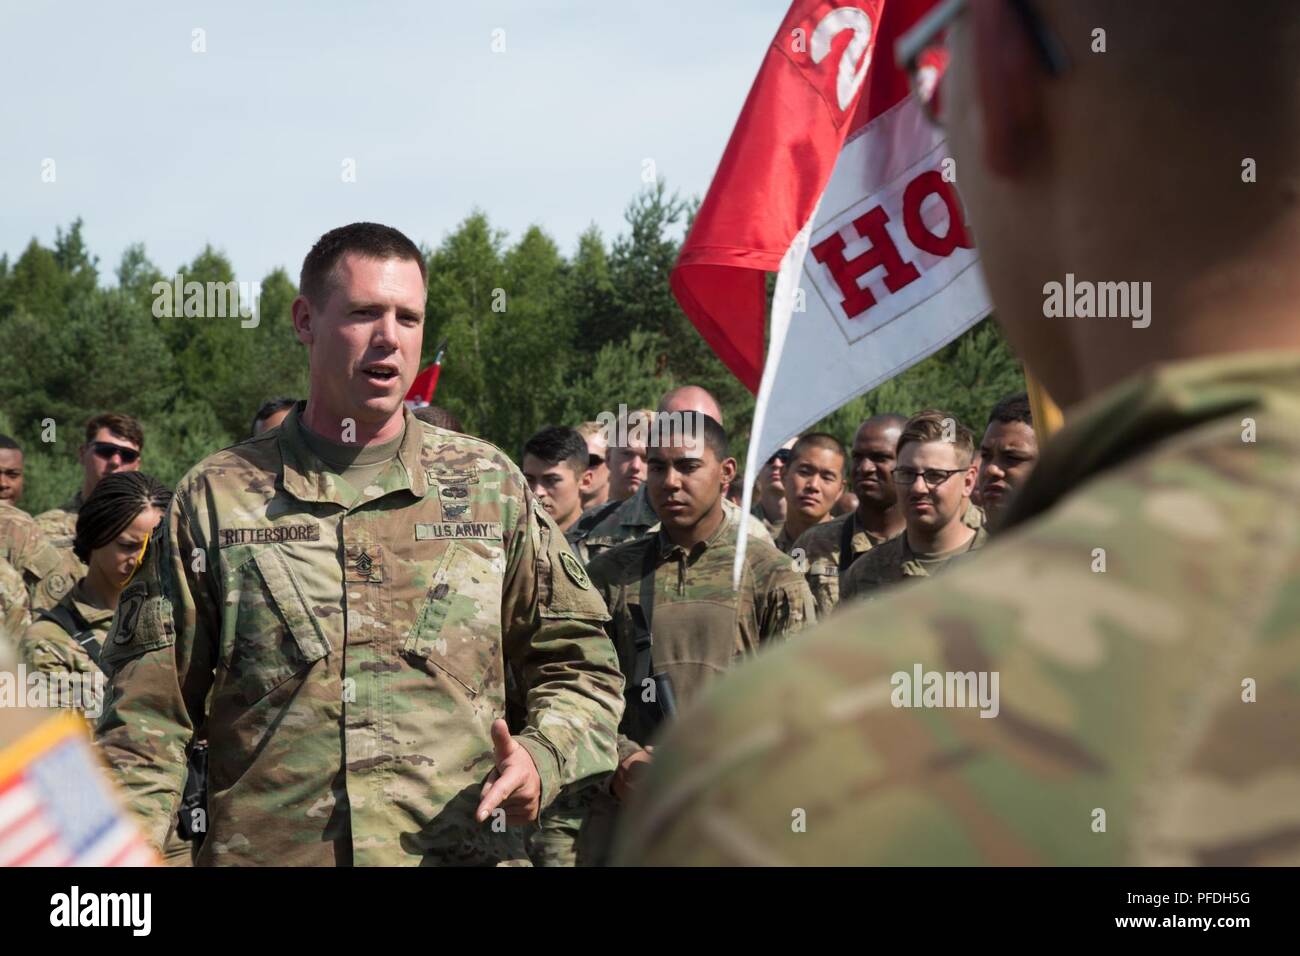 1st Sgt. William D. Rittersdorf, first sergeant, Headhunter Troop, 2nd Squadron, 2d Cavalry Regiment, talks to his squadron in Kazlu Ruda, Lithuania, June 10, 2018. U.S. Army Europe’s exercise Saber Strike 18 promotes regional stability and security, while strengthening partner capabilities and fostering trust; the combined training opportunities that it provides greatly improve interoperability among participating NATO allies and key regional partners. Stock Photo